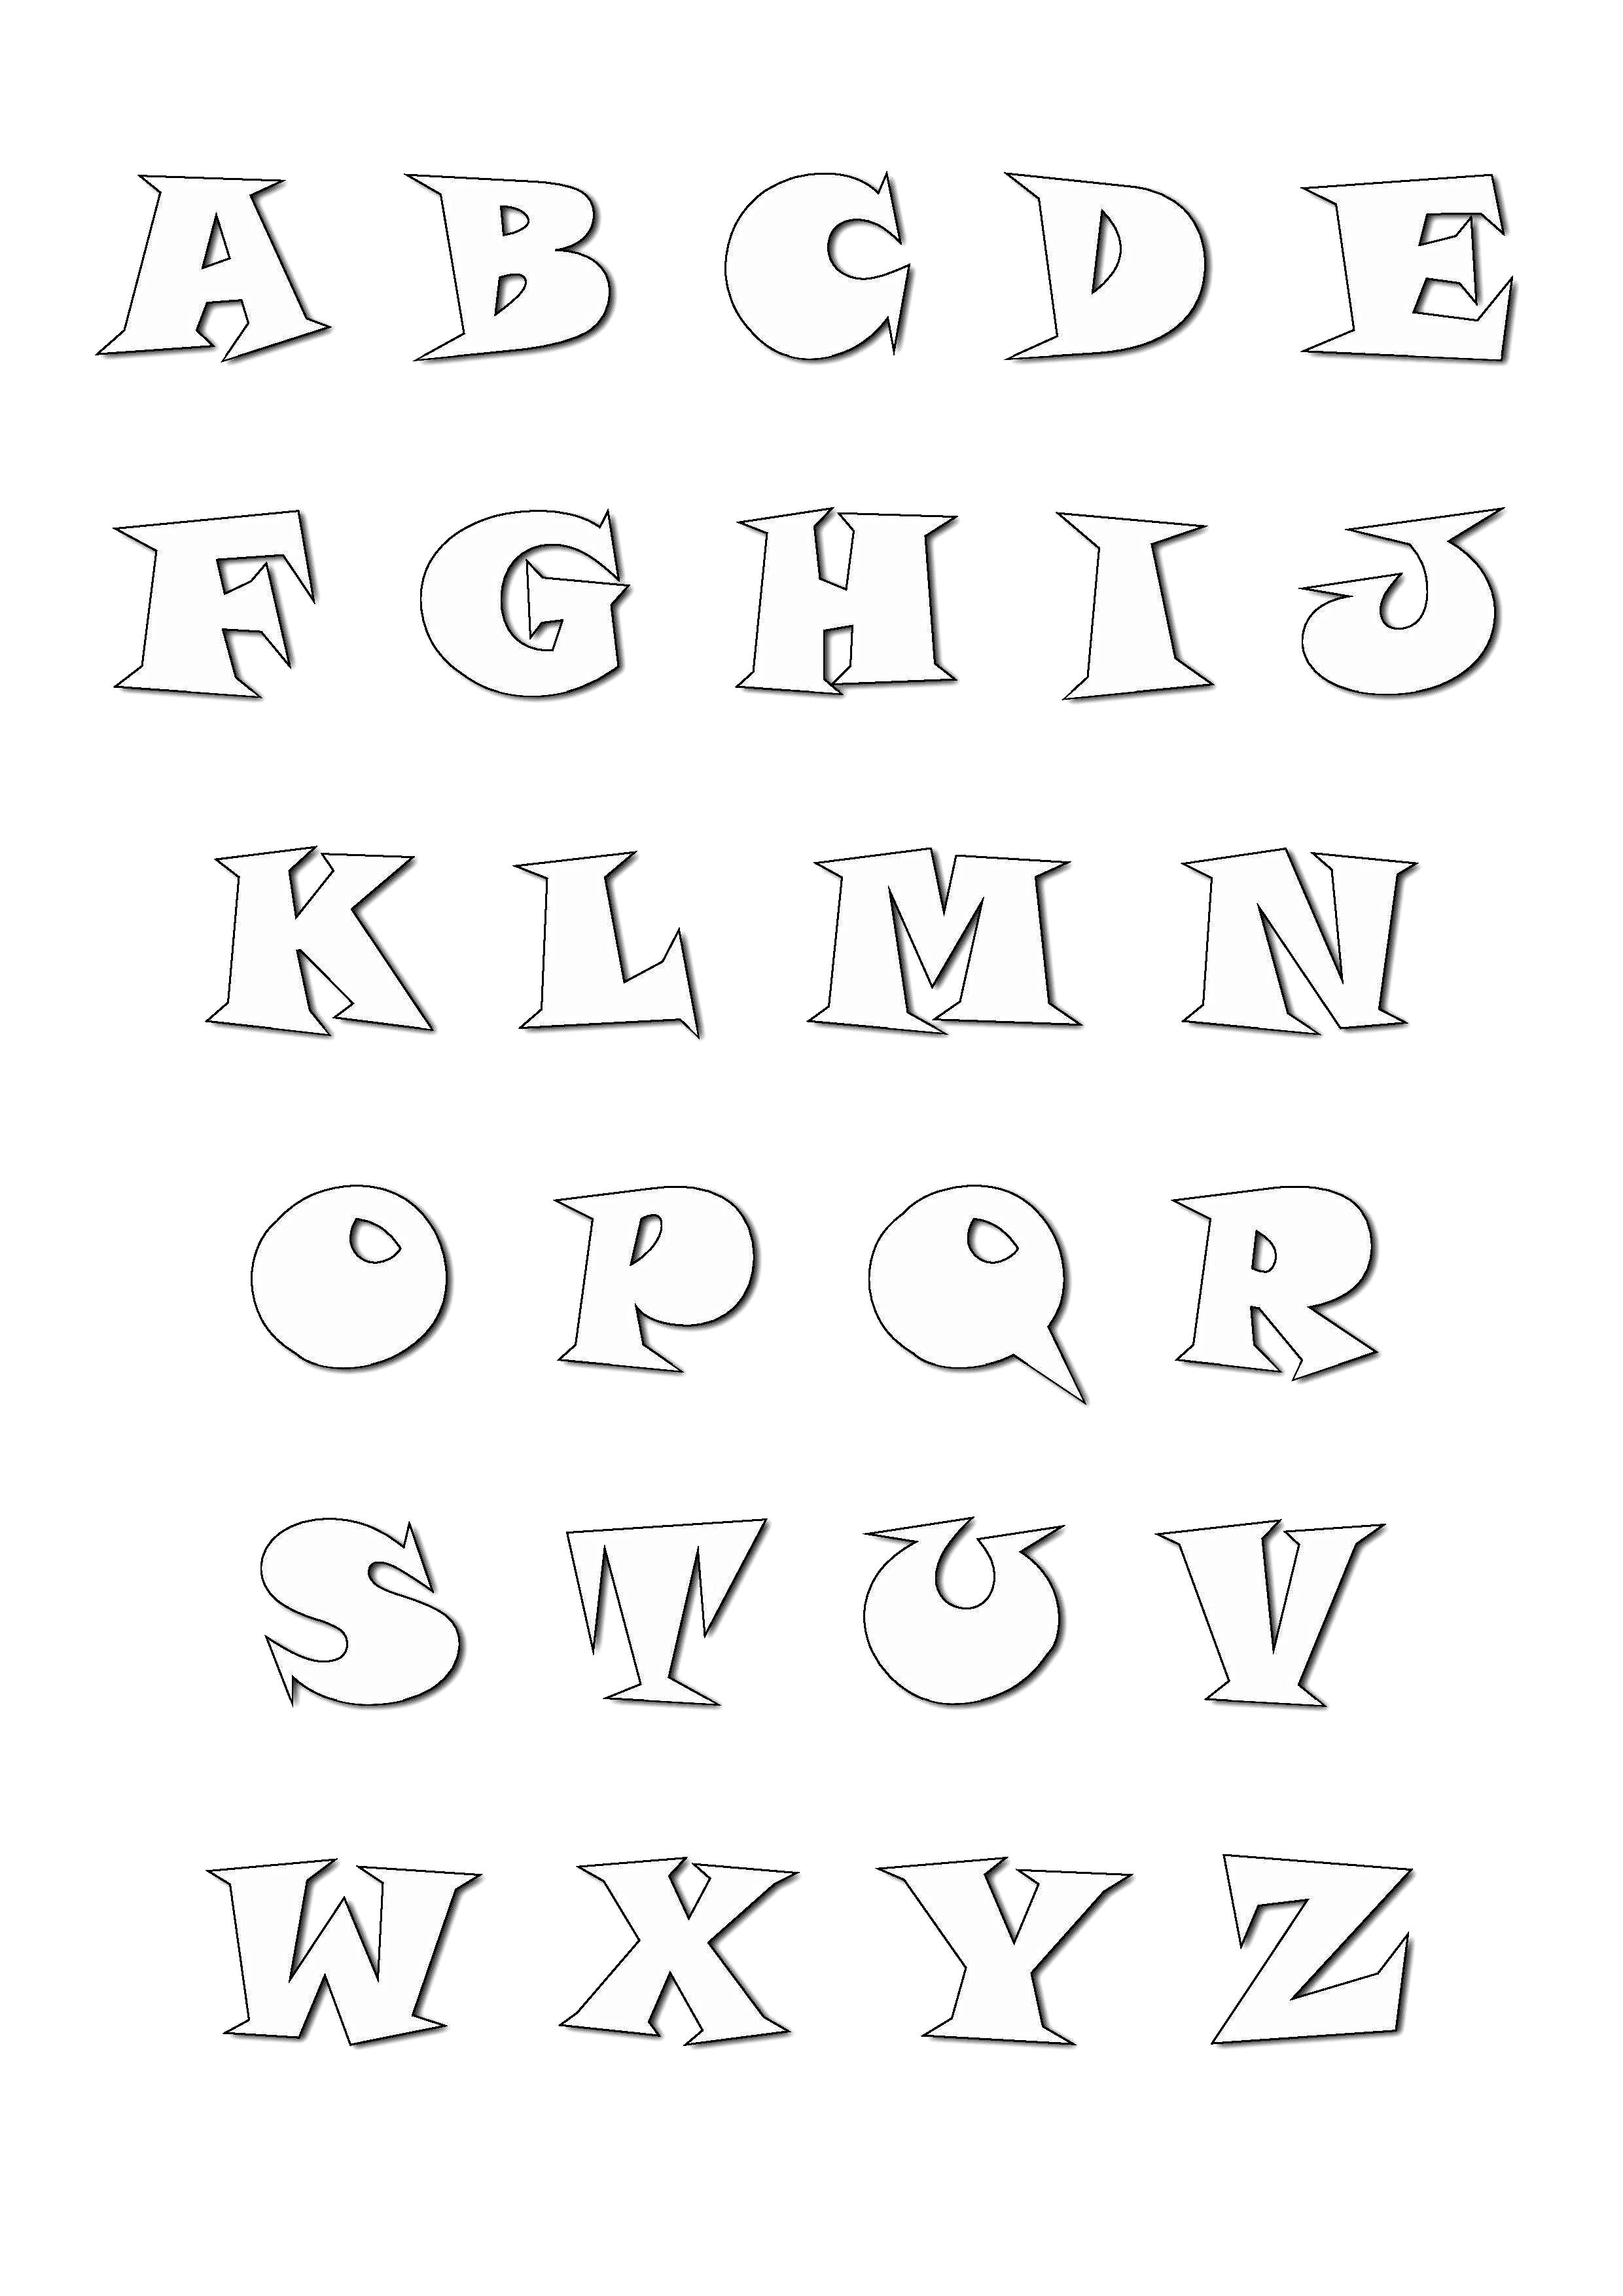 Alphabet to download - Alphabet Kids Coloring Pages